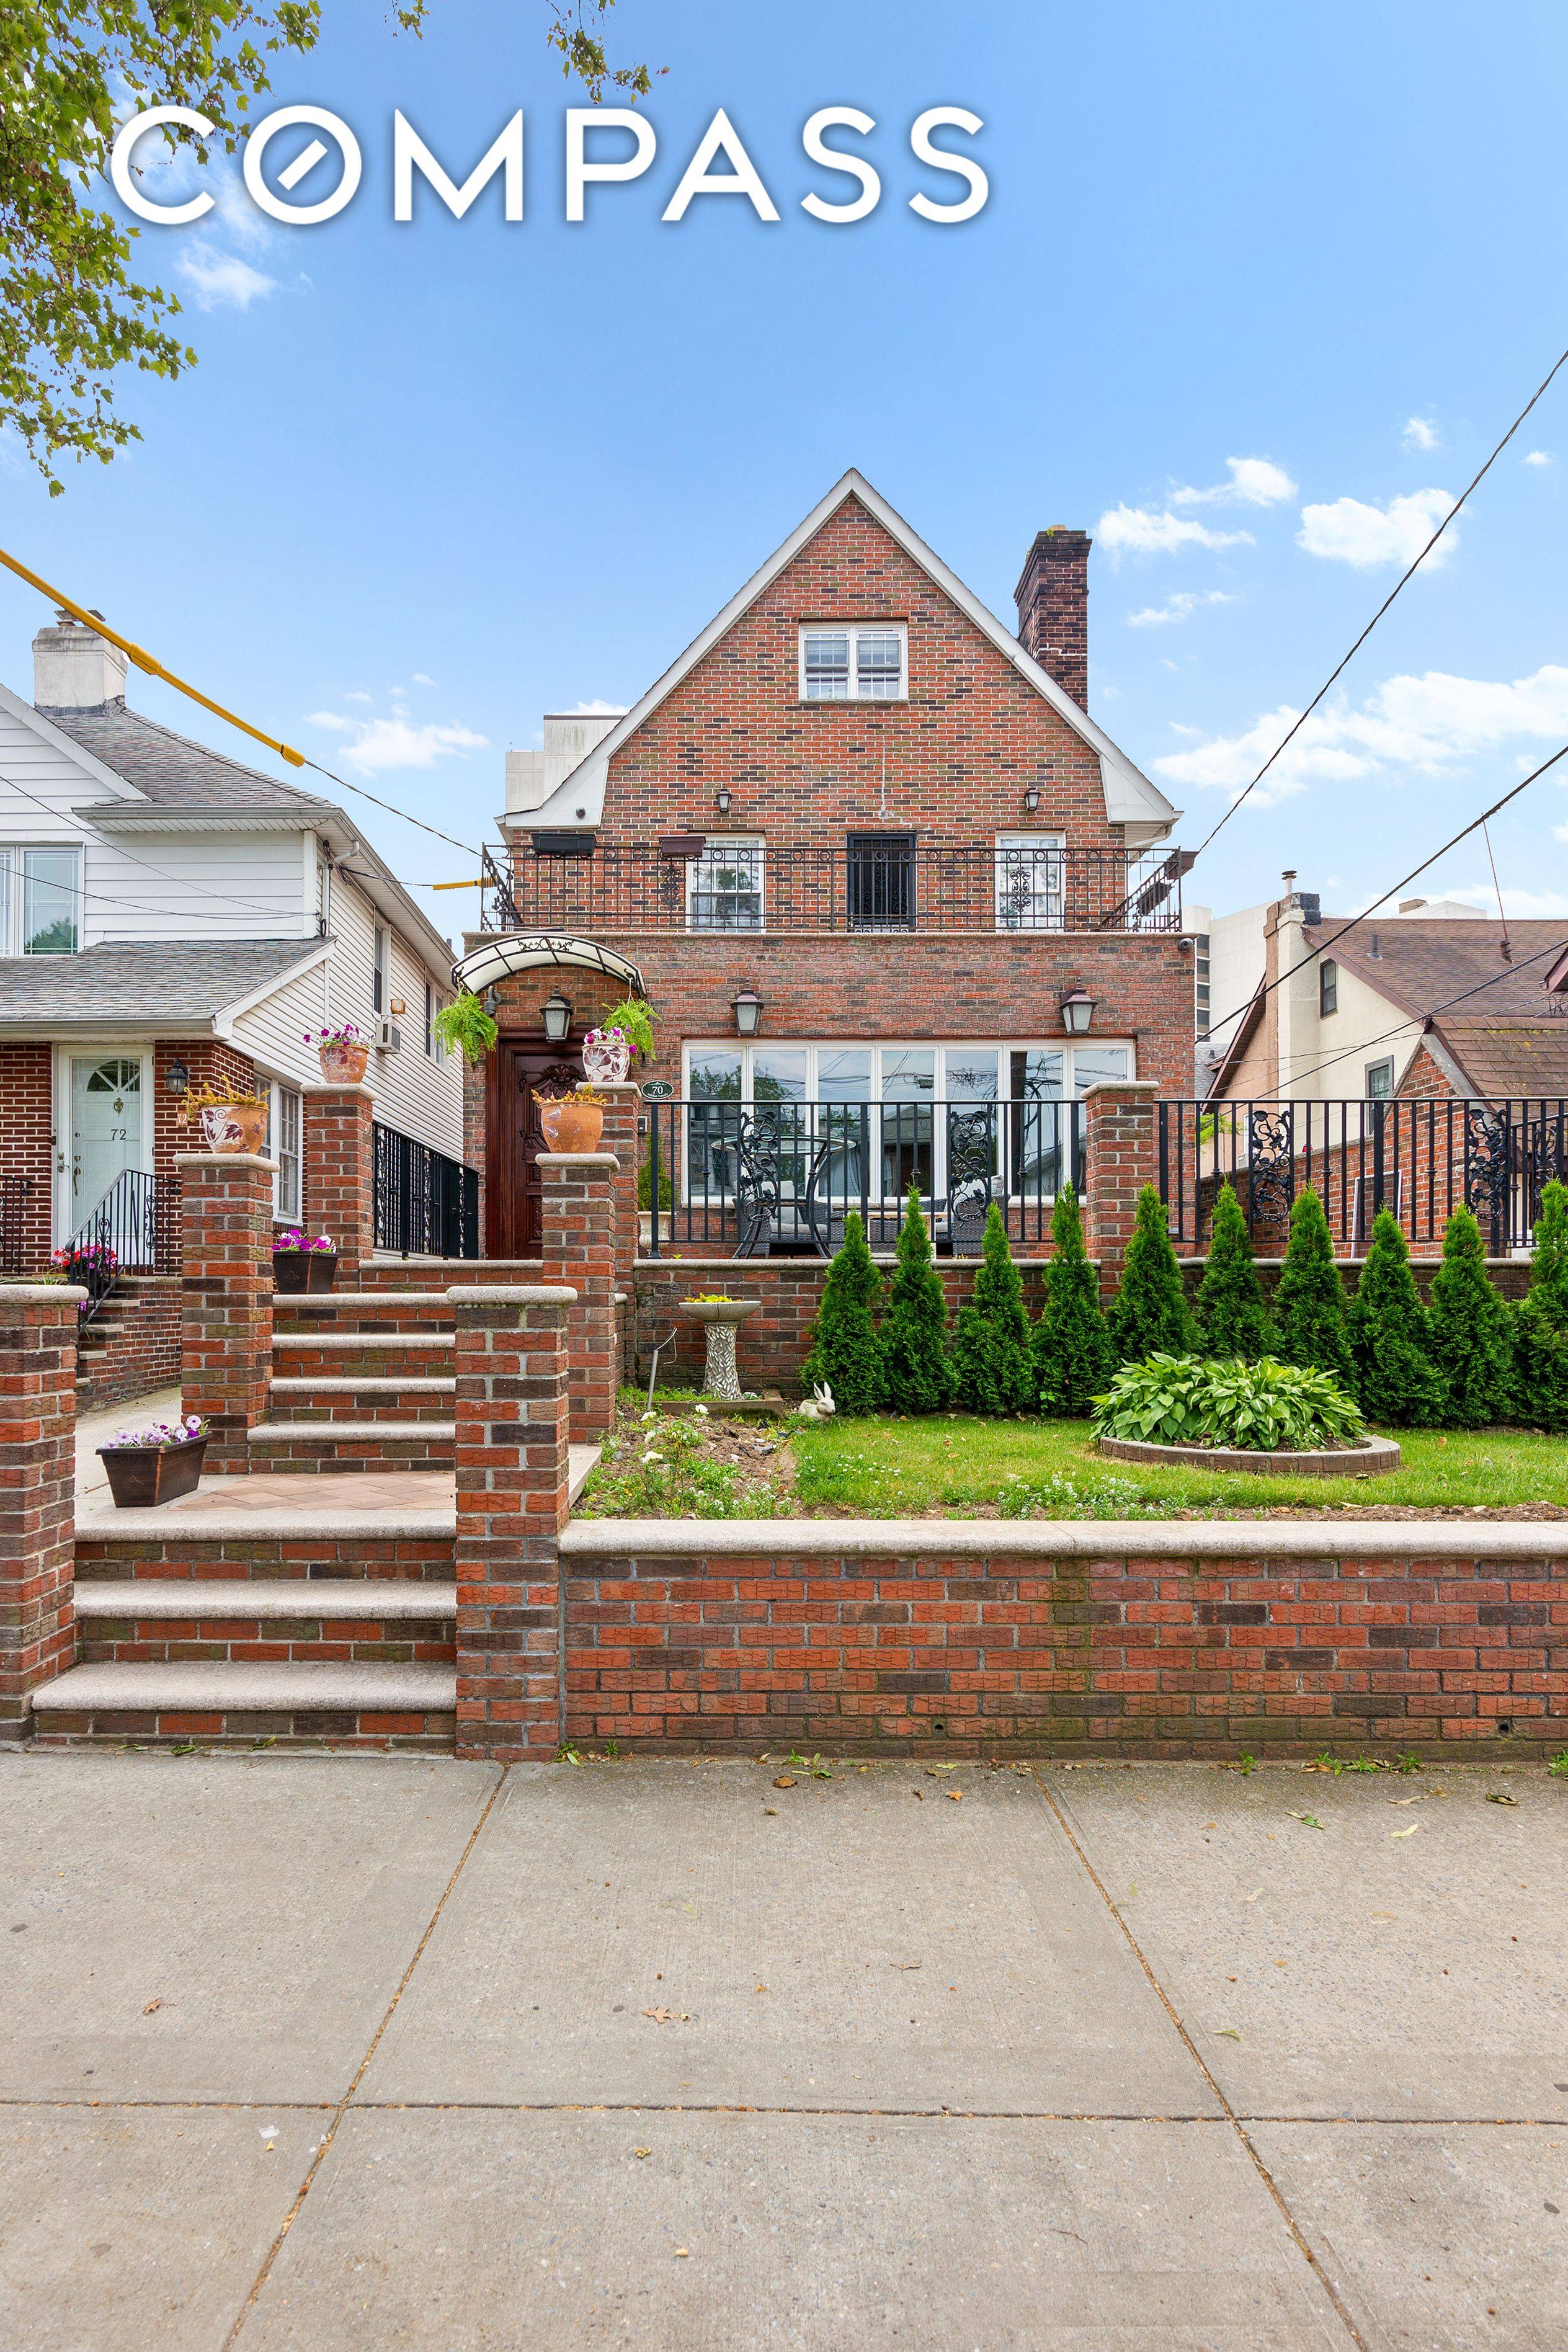 A single family detached, all brick, magnificent 30 x 220 lot size home.